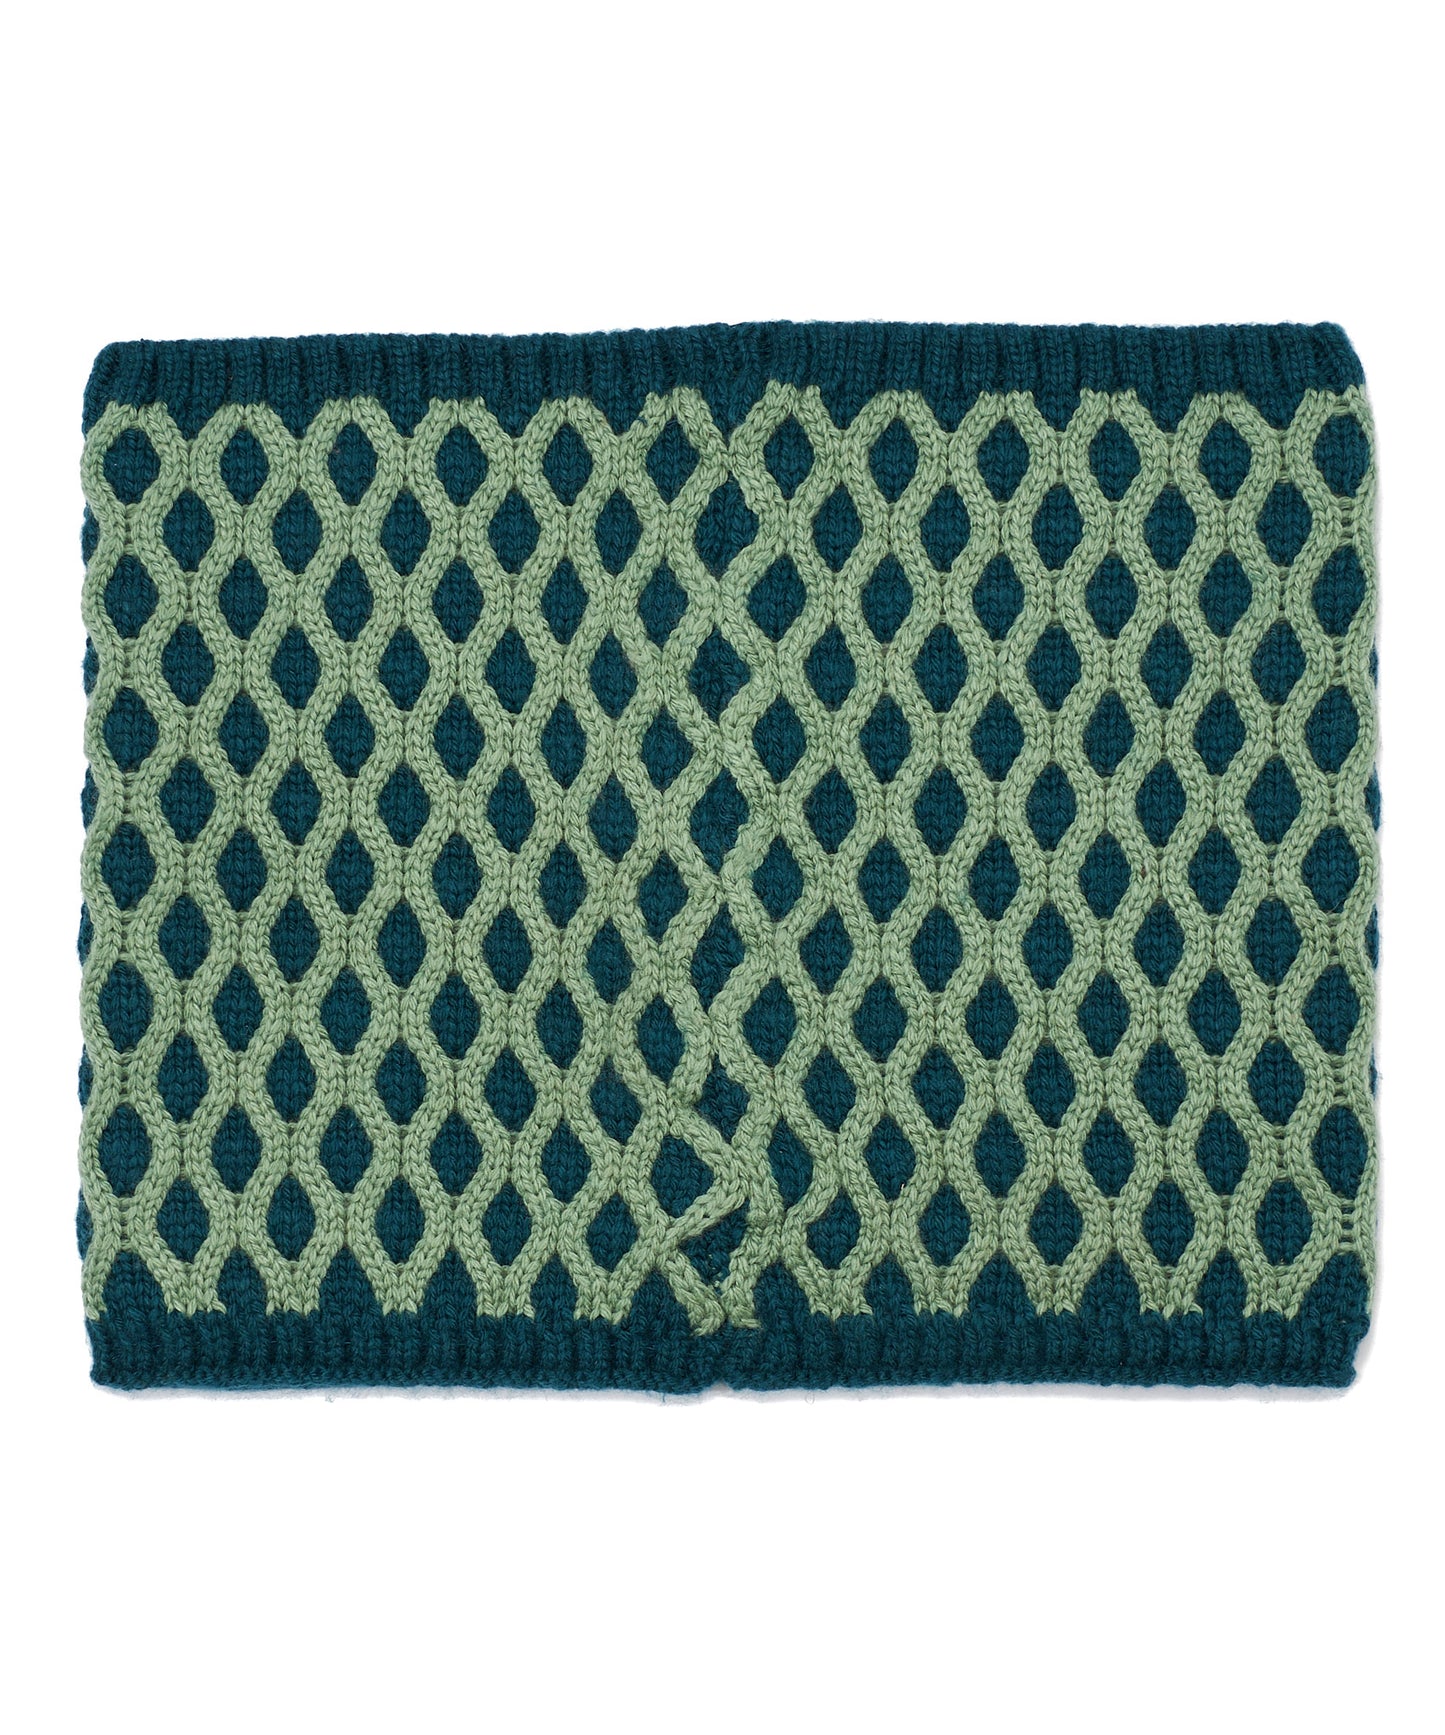 Recycled Bi-color Honeycomb Neck Warmer in color Deep Teal